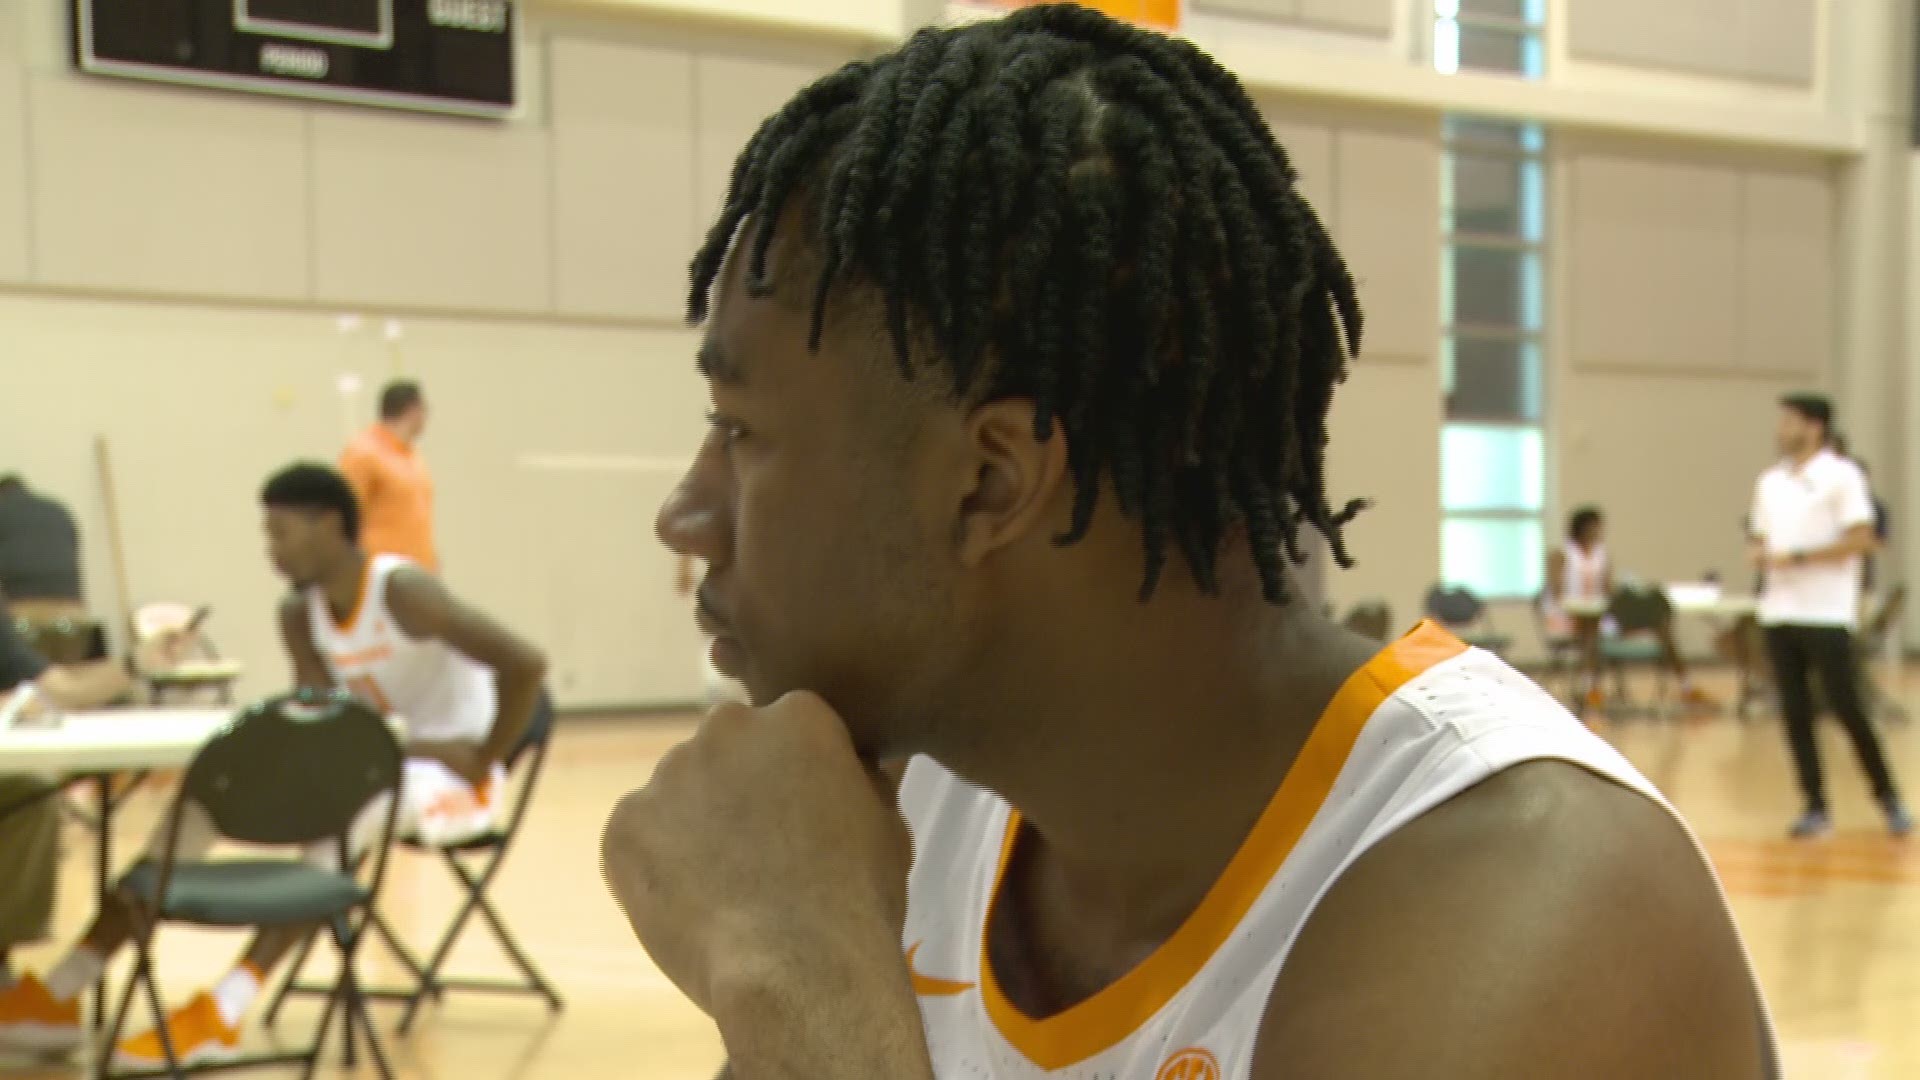 Jordan Bowden speaks with WBIR at the Tennessee basketball media day.